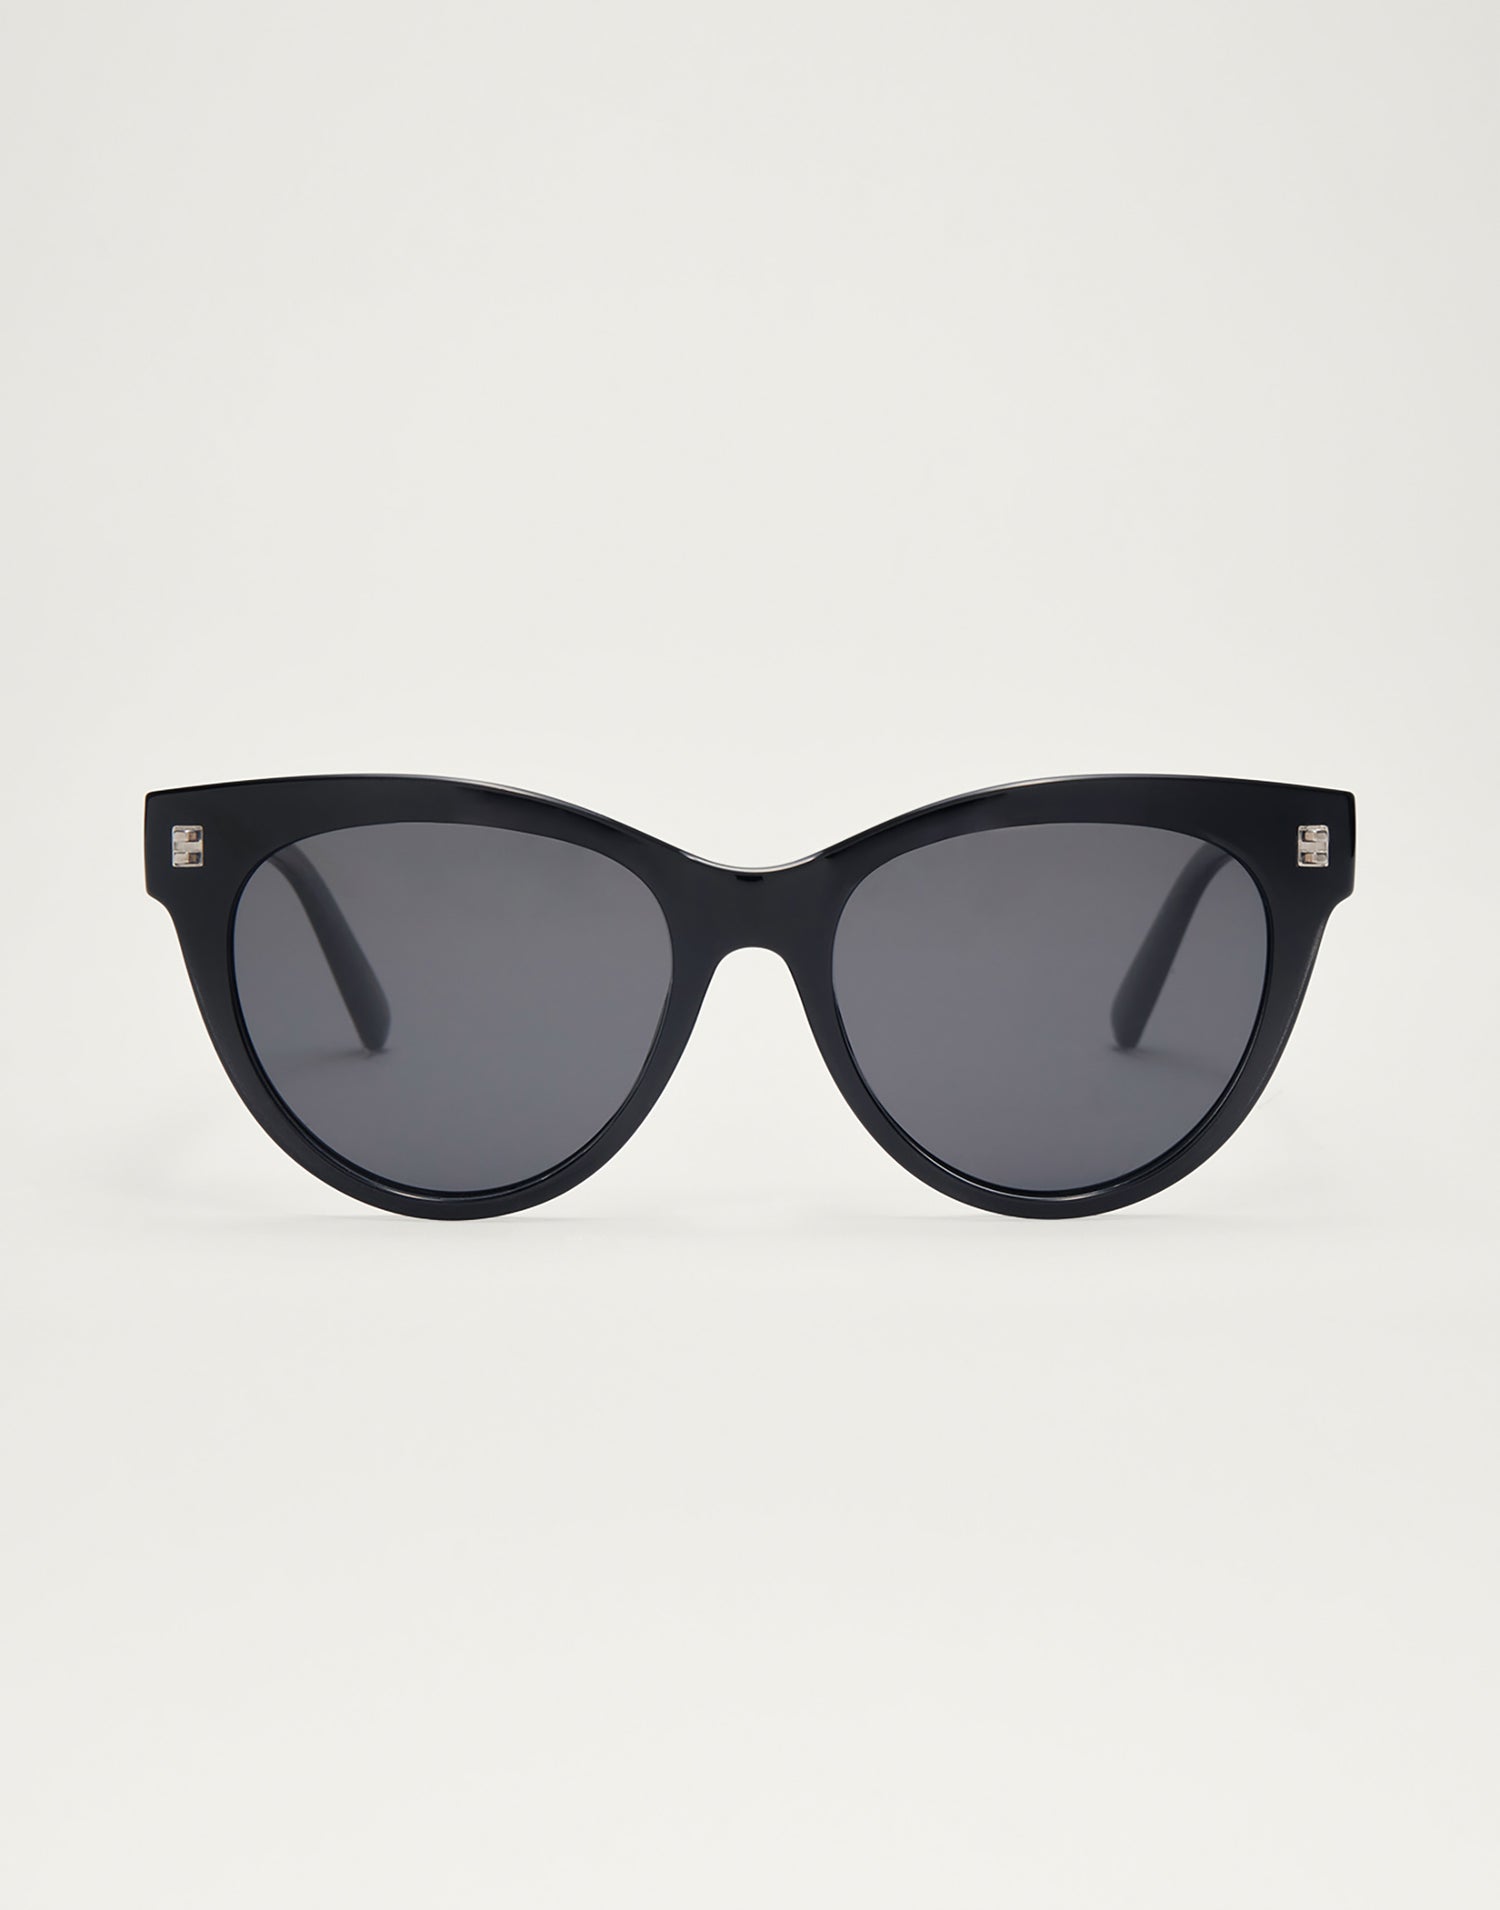 Bright Eyed Sunglasses by Z Supply in Crystal Black - Front View